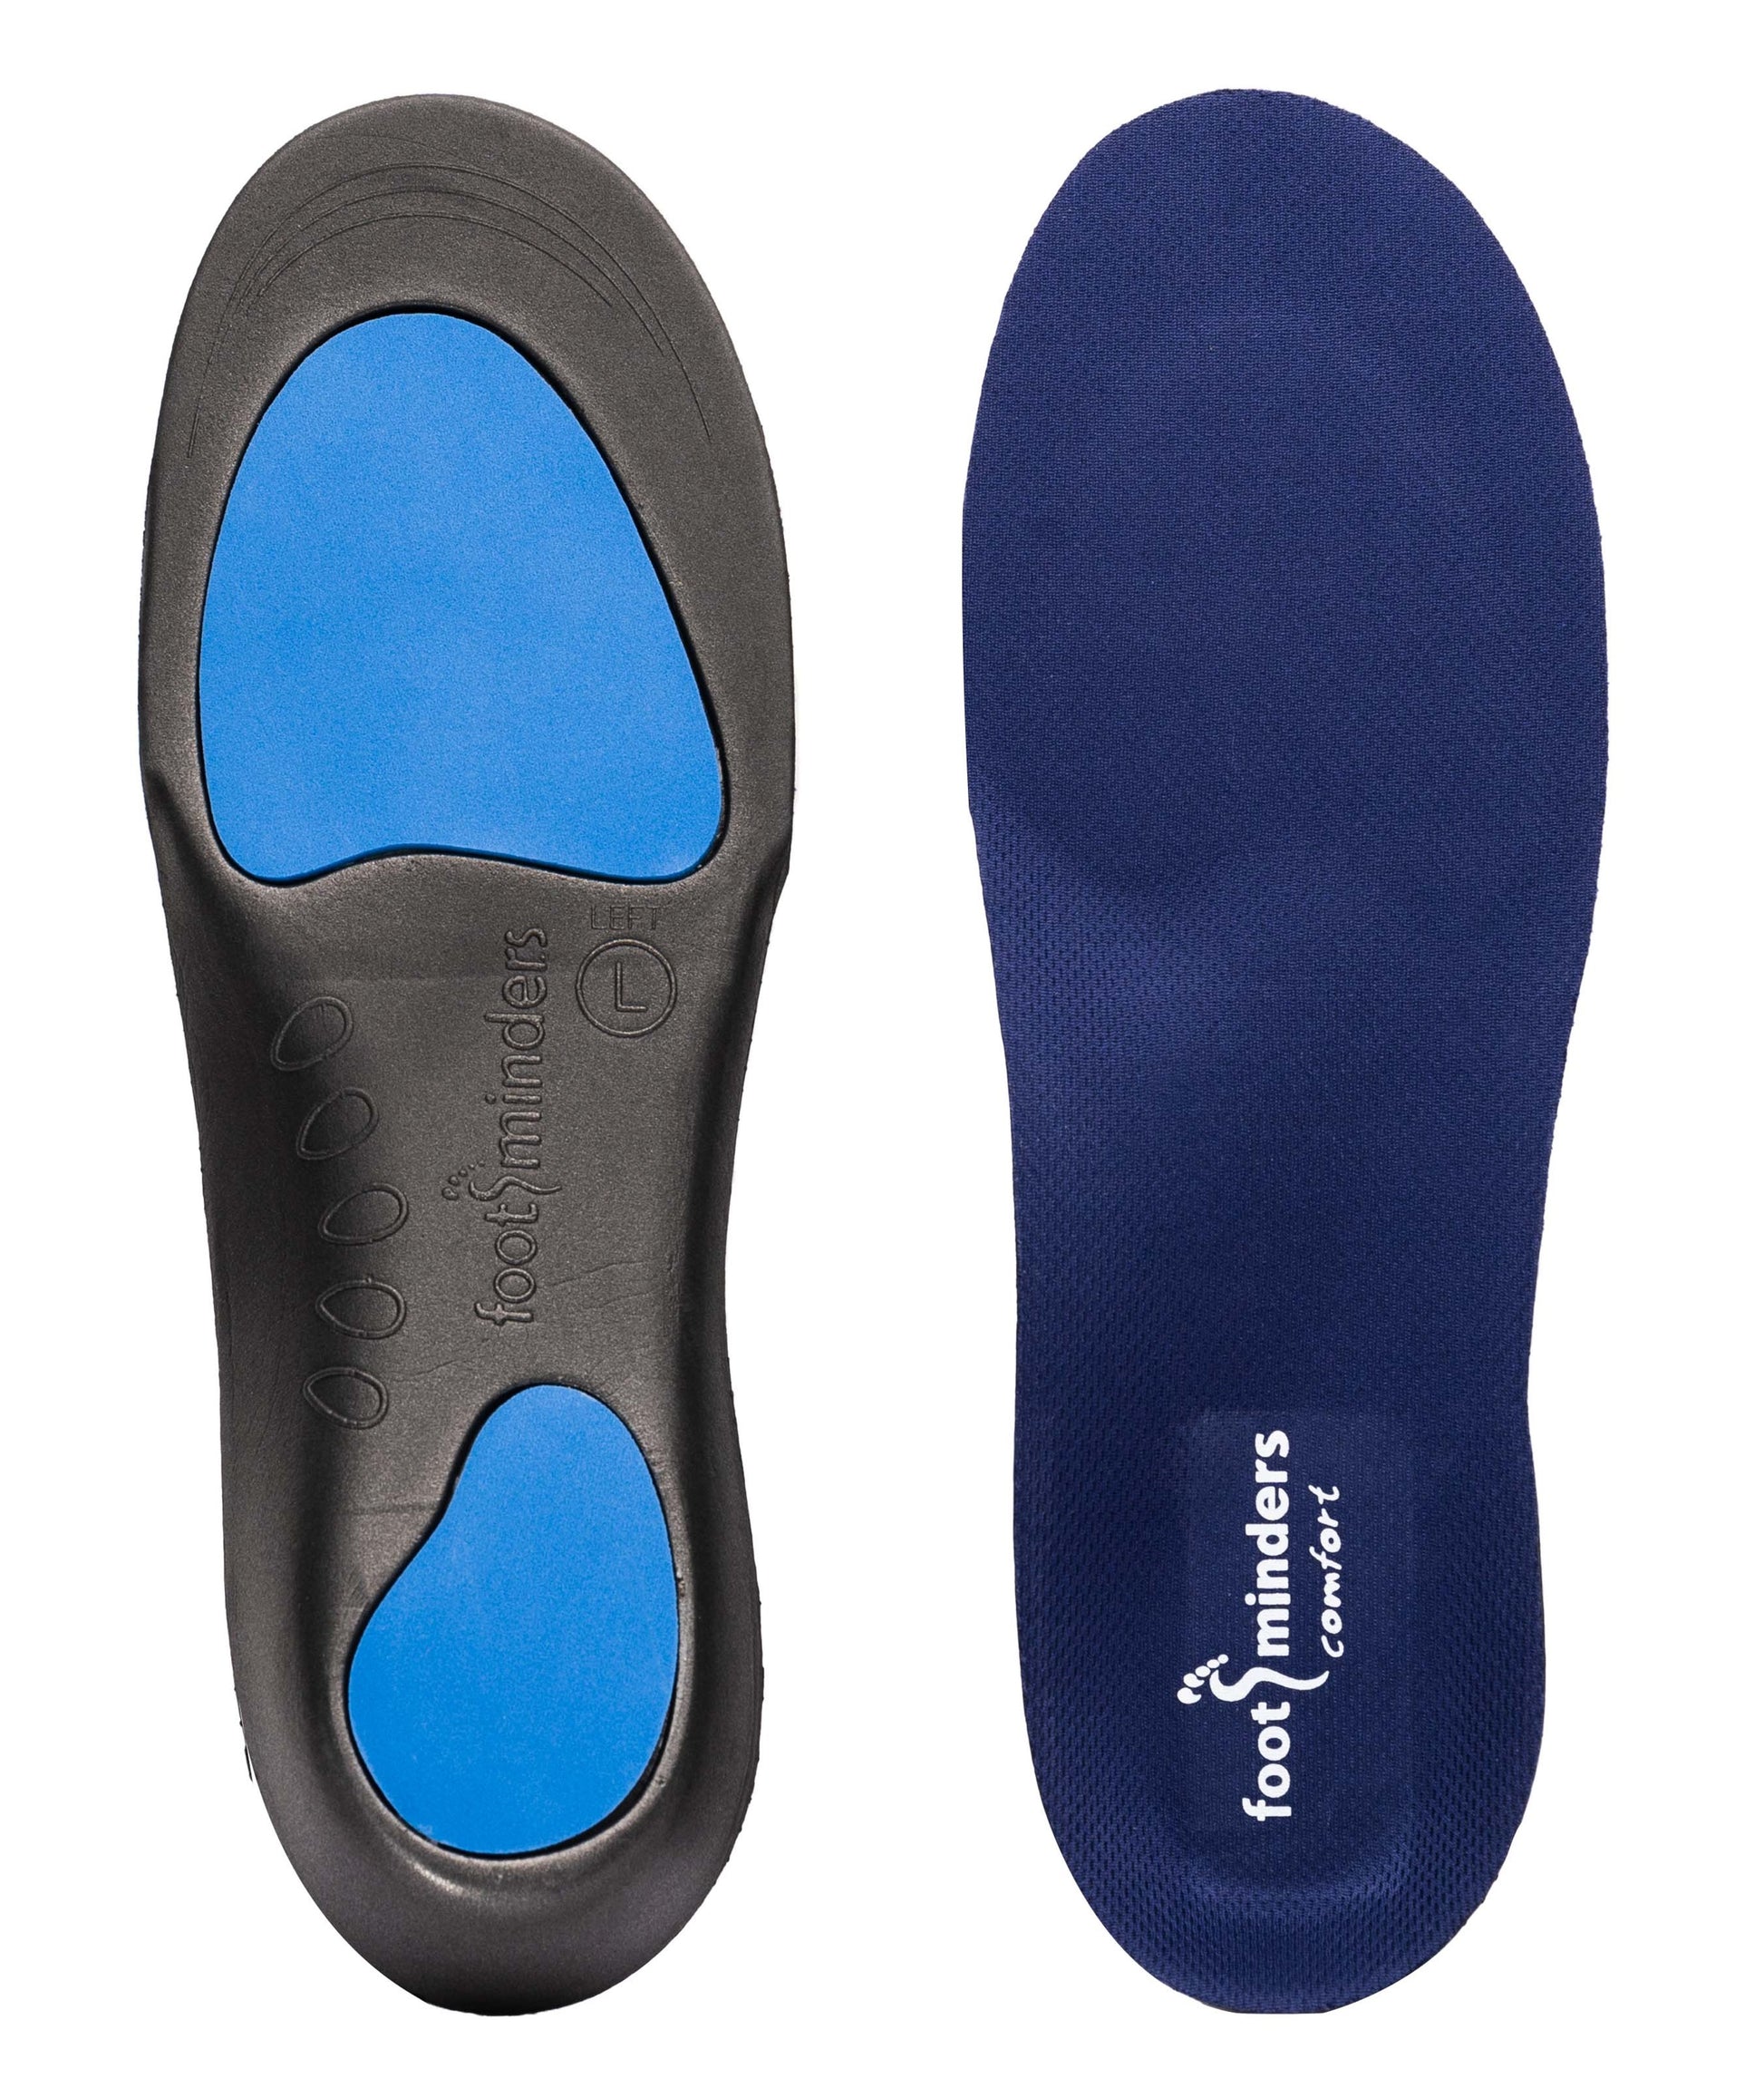 Footminders COMFORT - Orthotic arch support insoles for sports shoes and work boots - Footminders Inc.